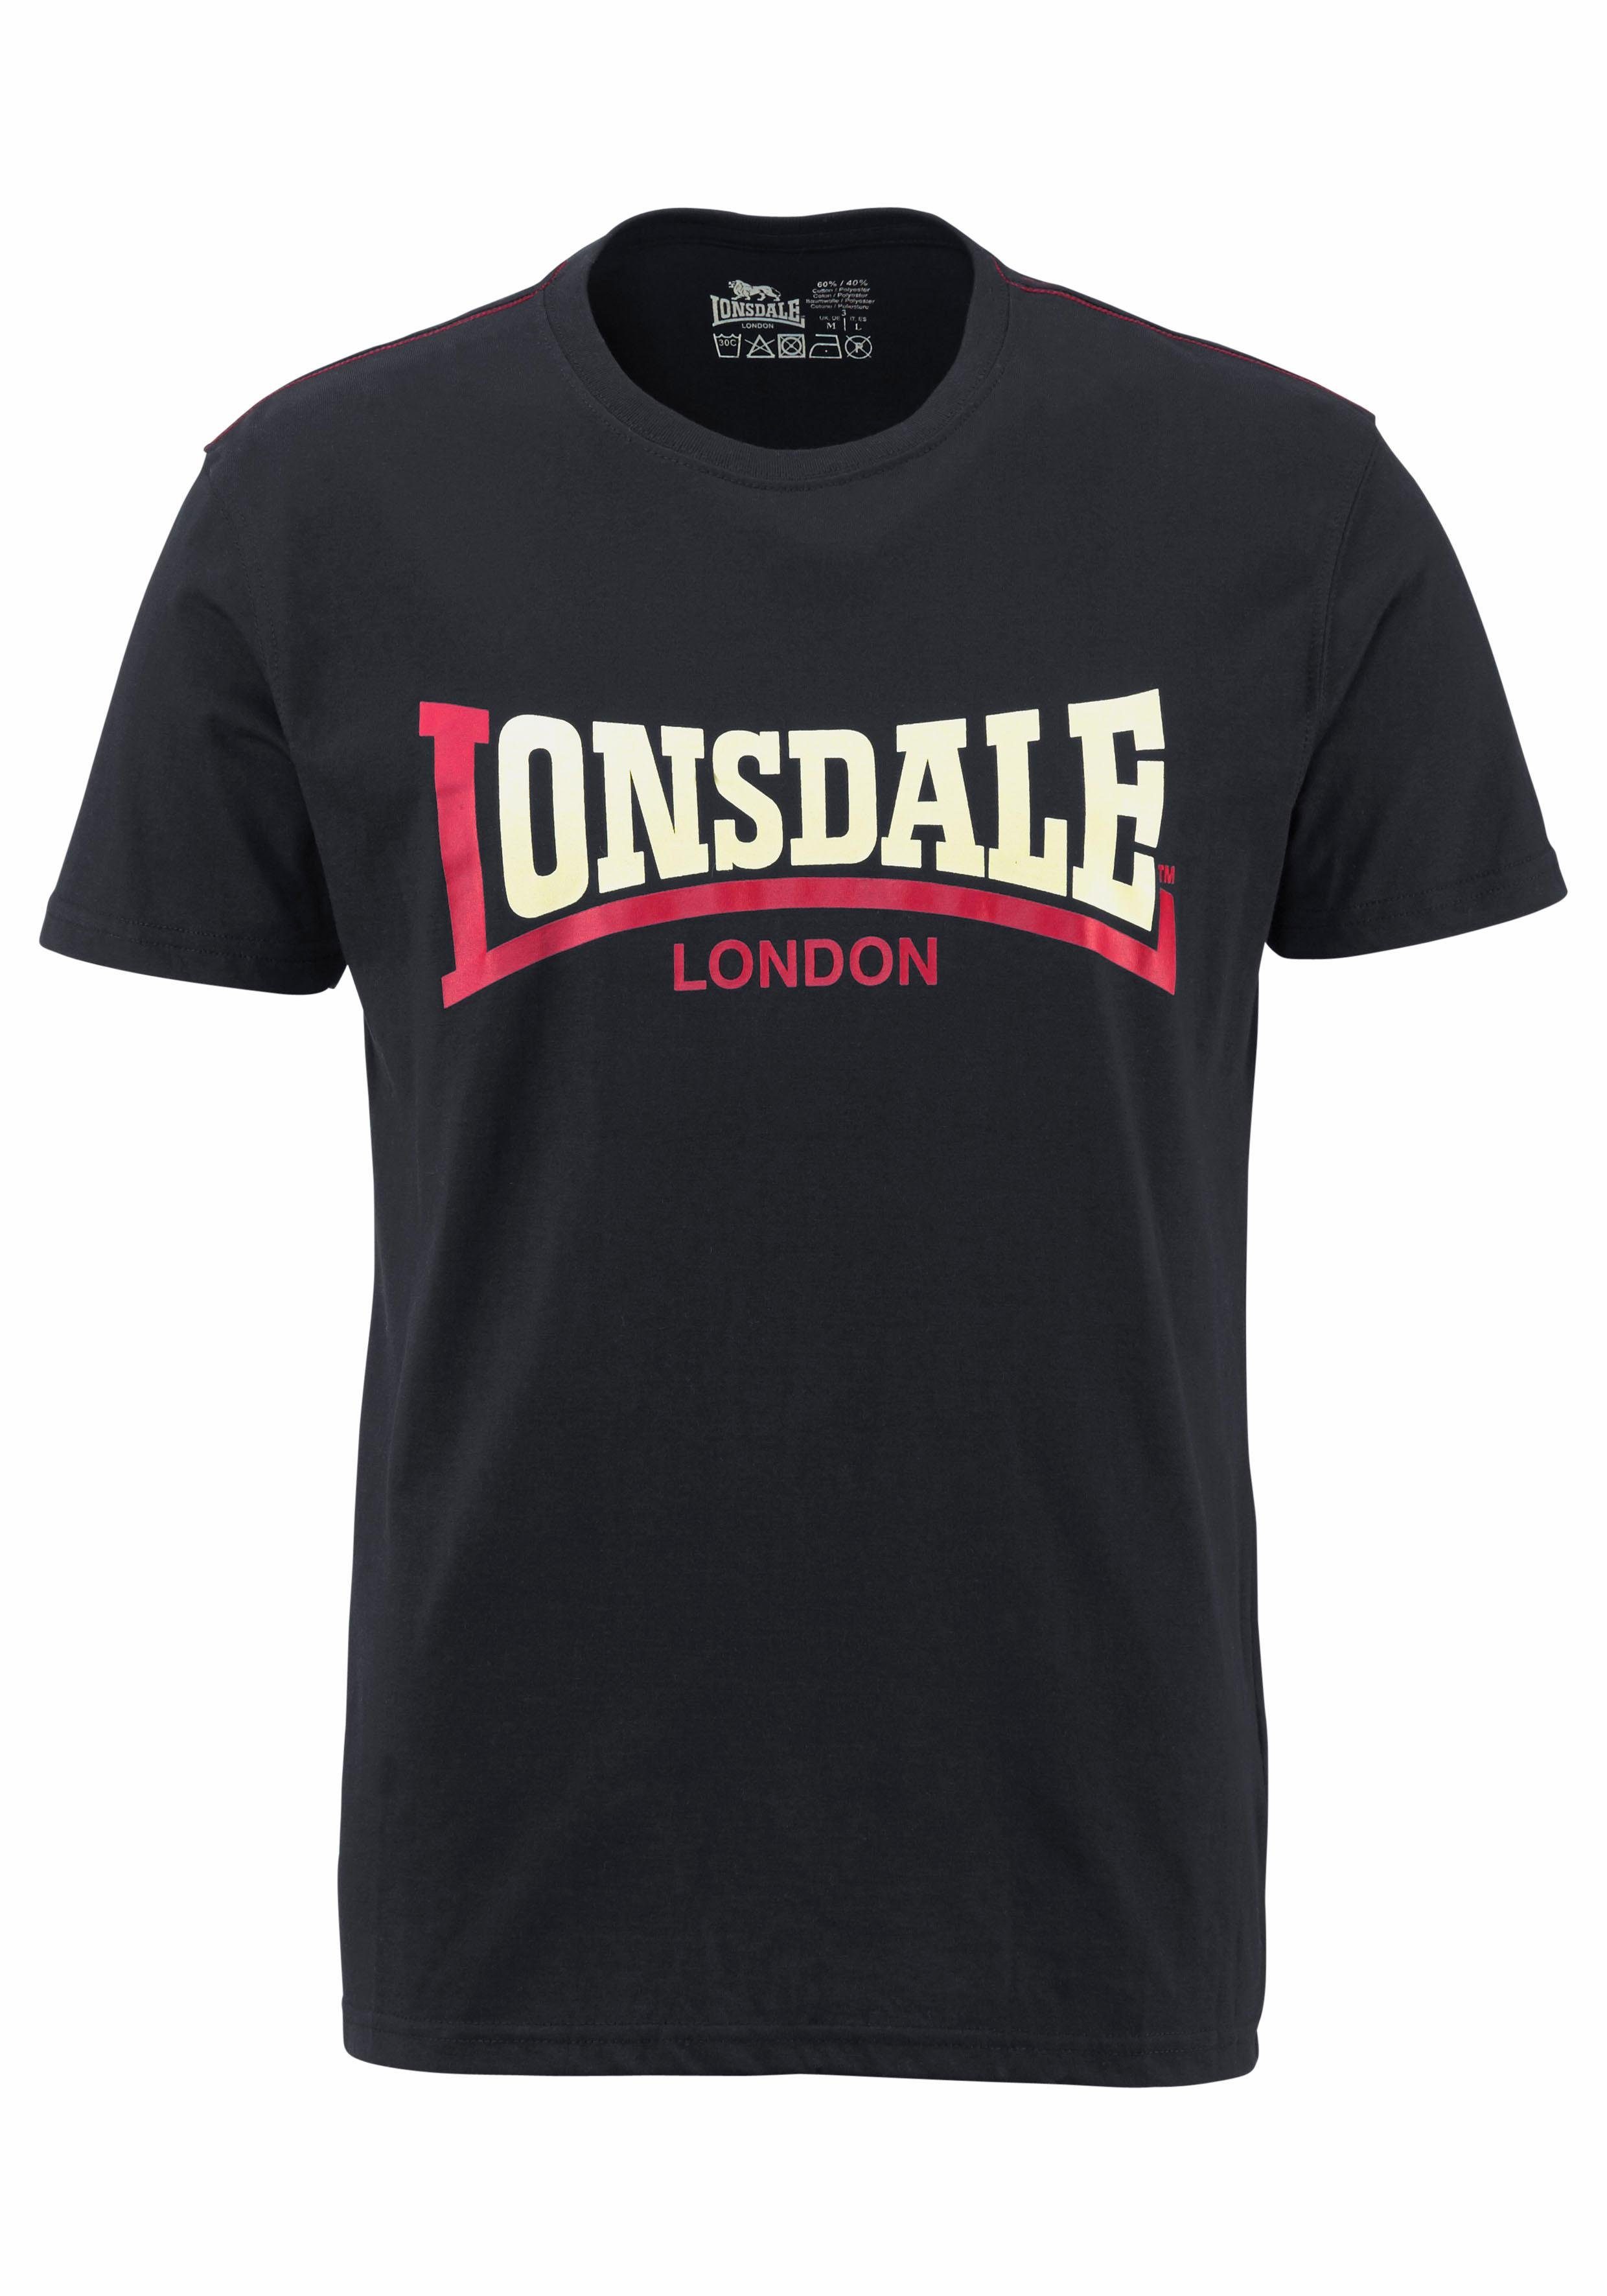 TWO T-Shirt TONE Lonsdale